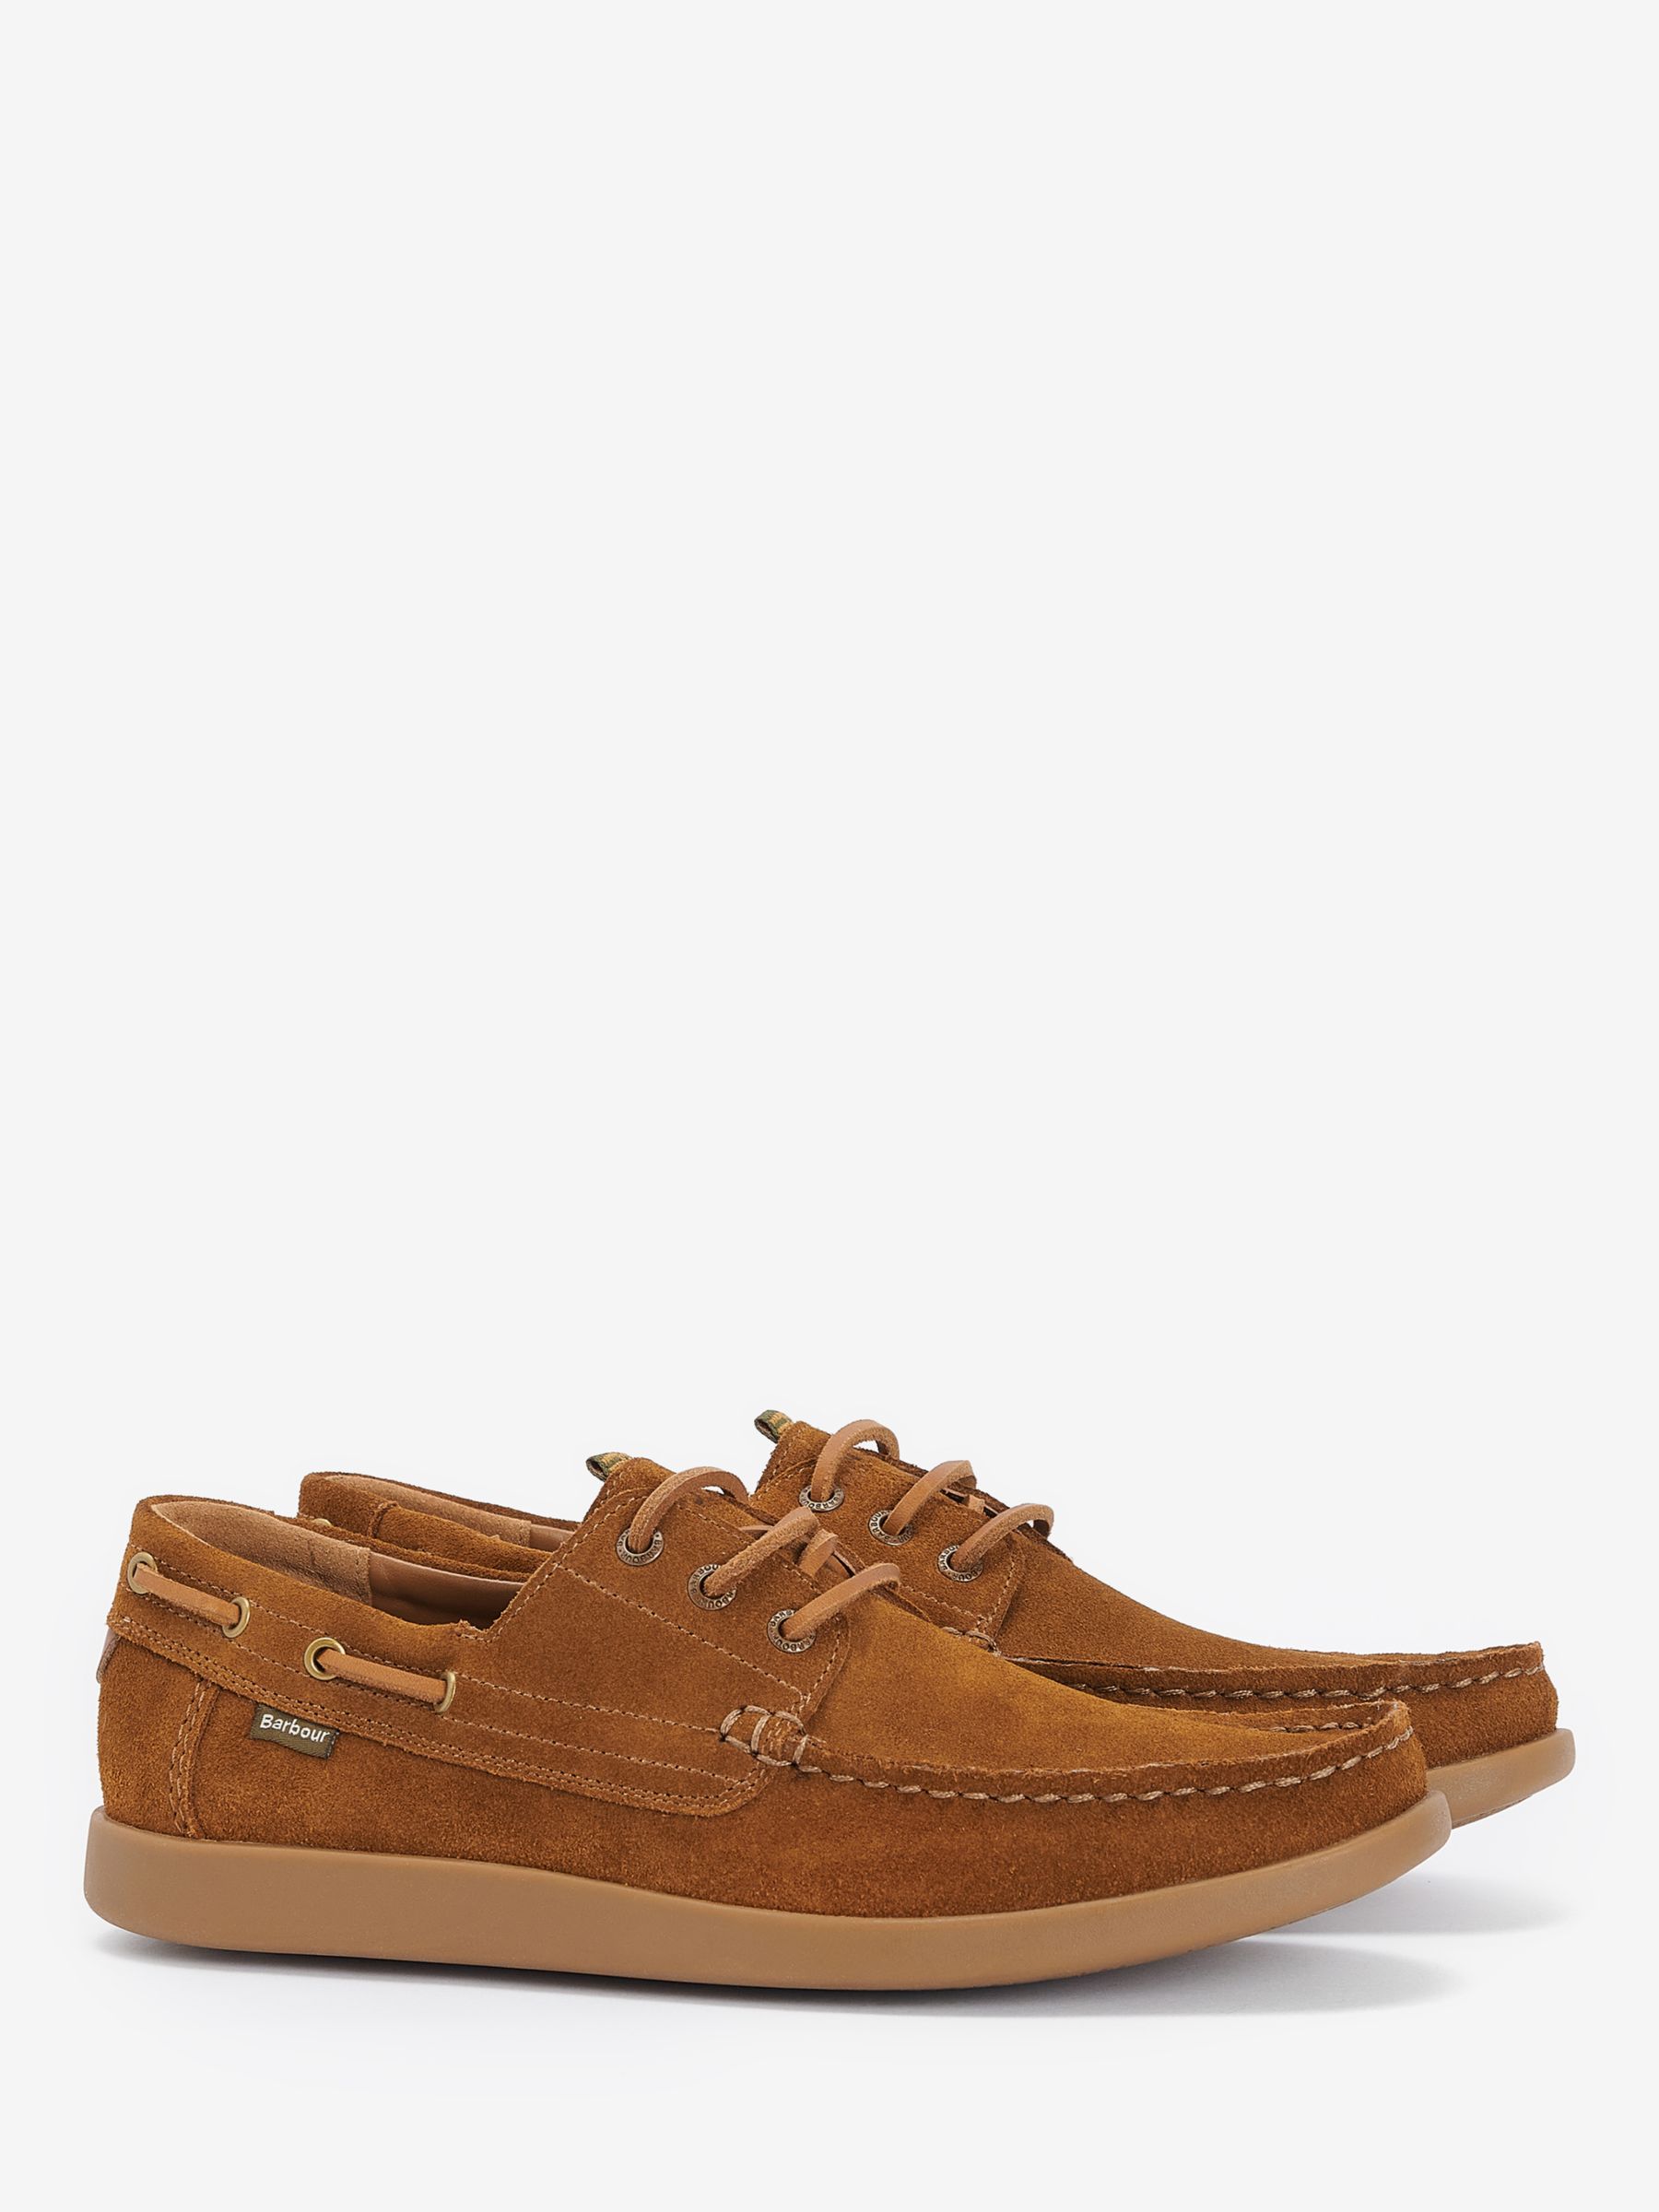 Barbour Armada Boat Shoes, Brown, 7